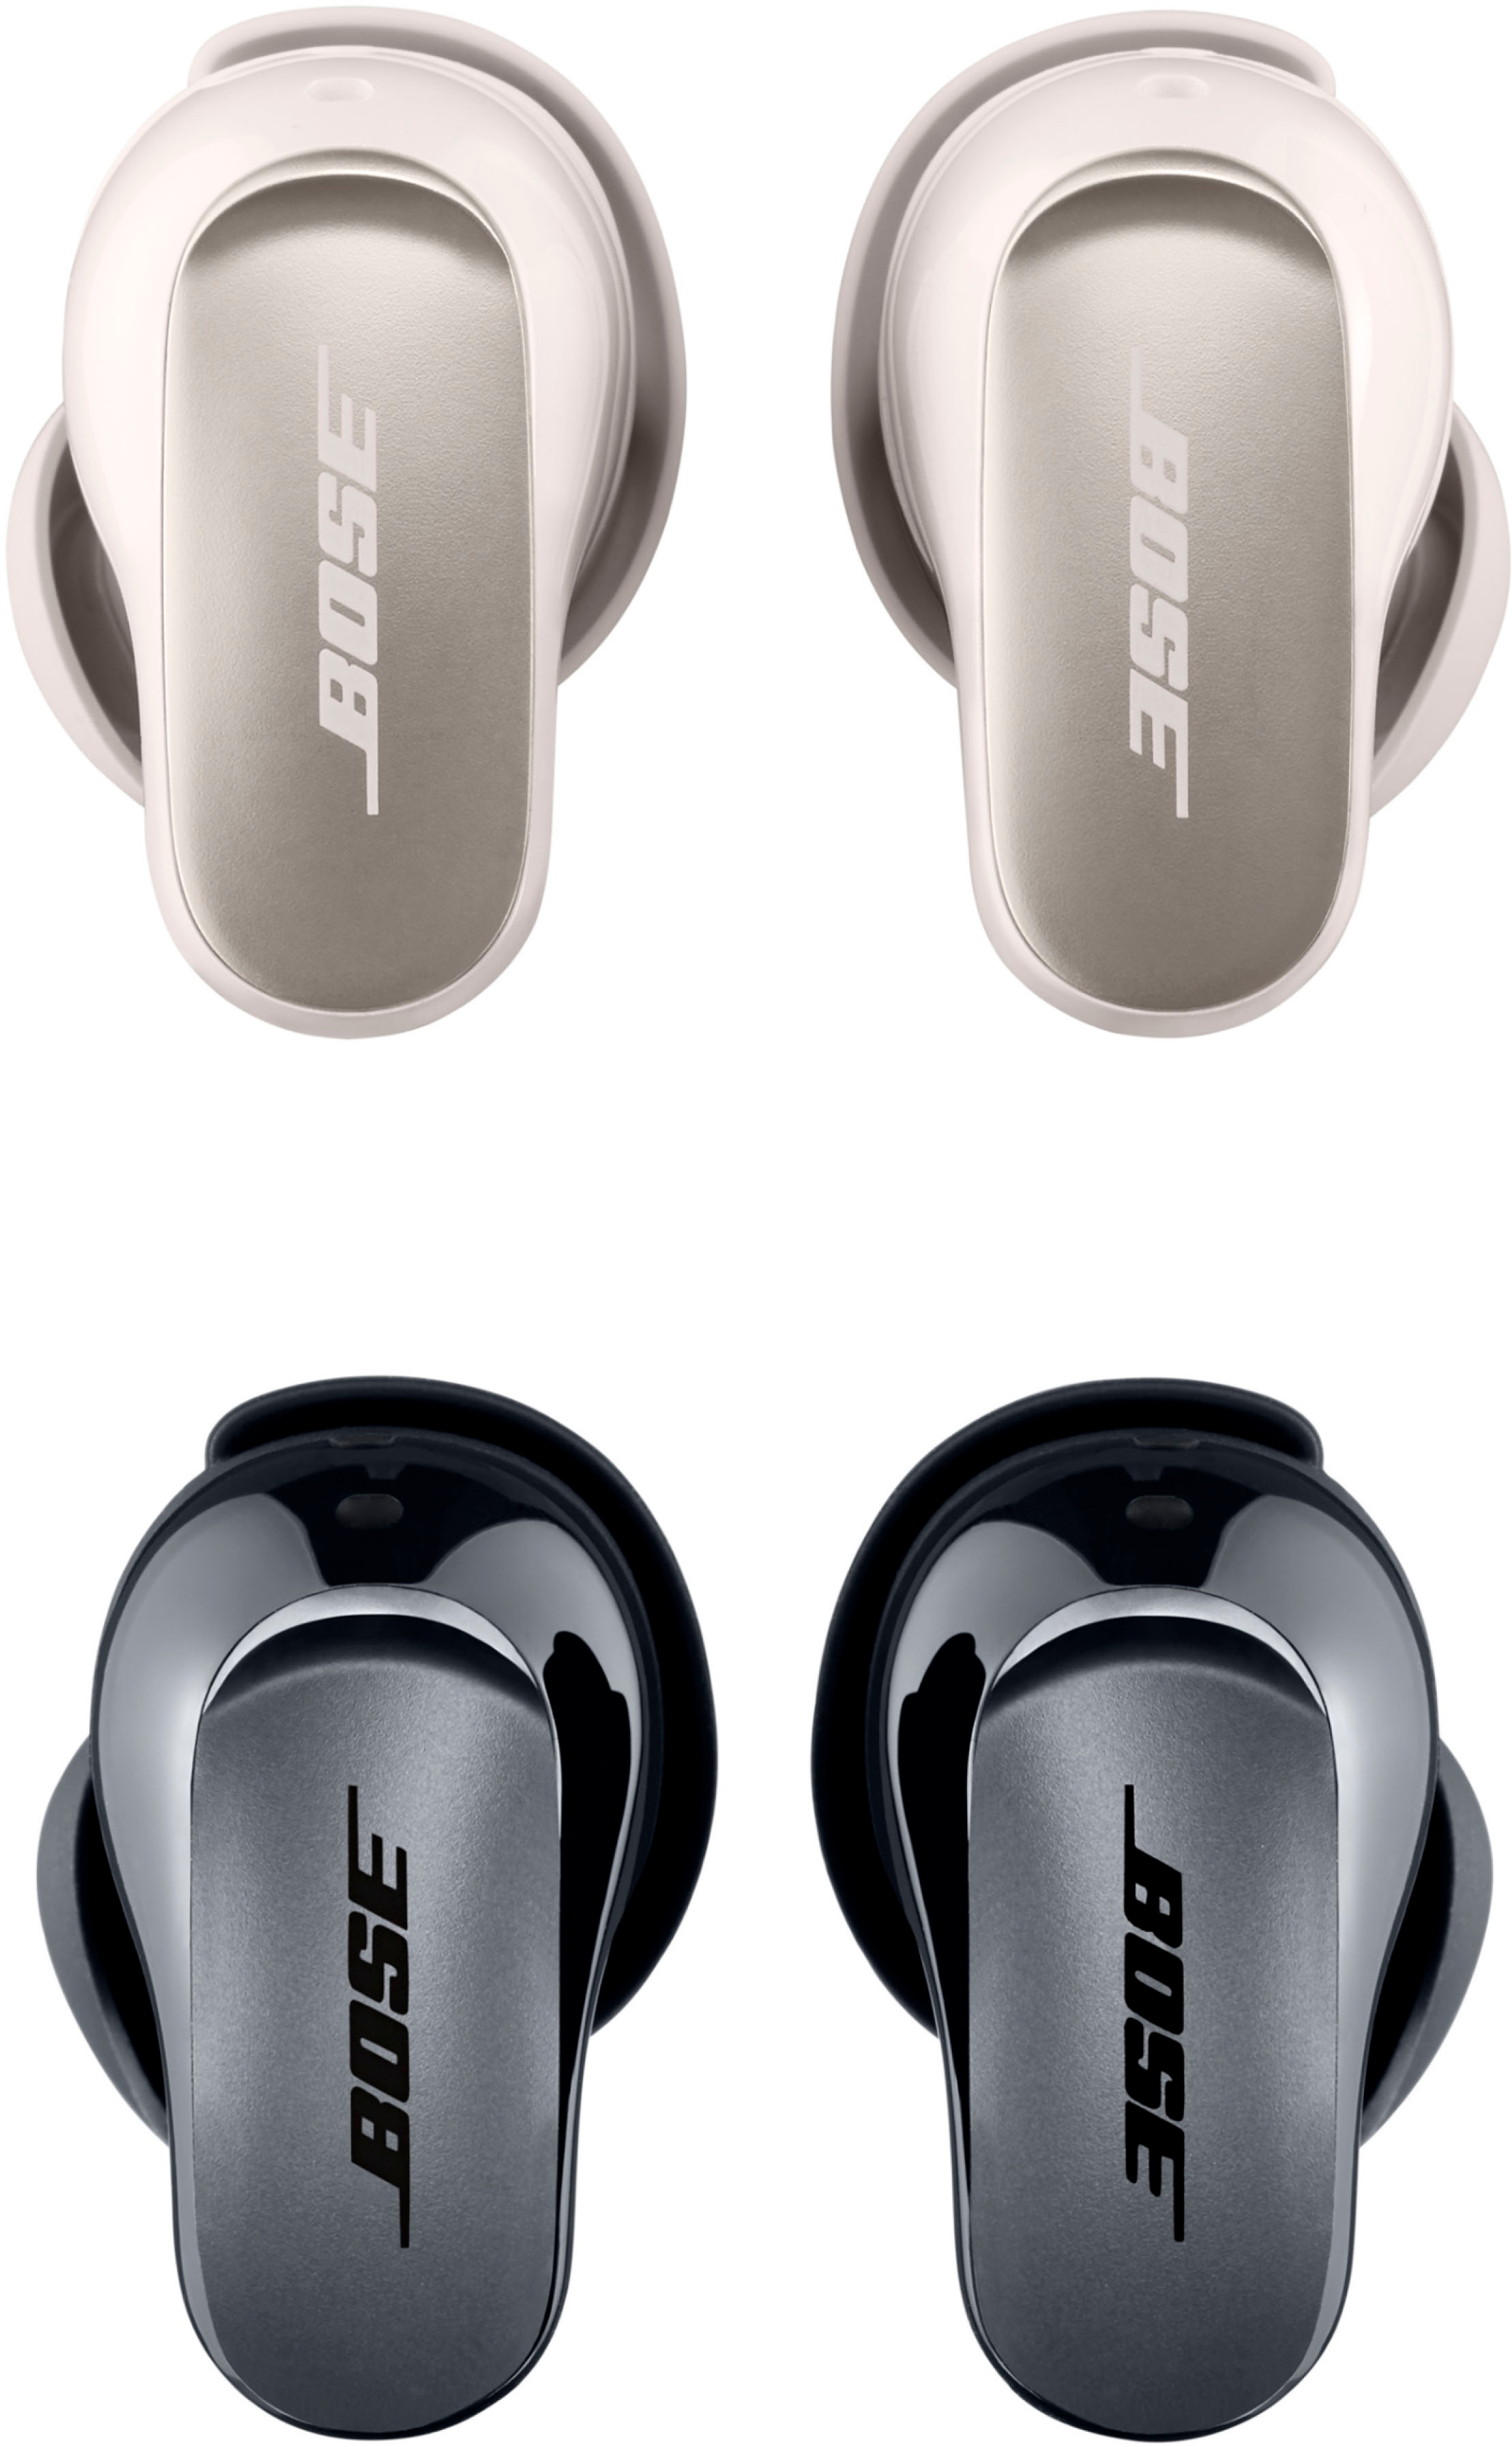 Bose SoundSport In-Ear Headphones review: A sweat-resistant, earbud-style  headphone that's ultracomfortable and stays in your ears - CNET